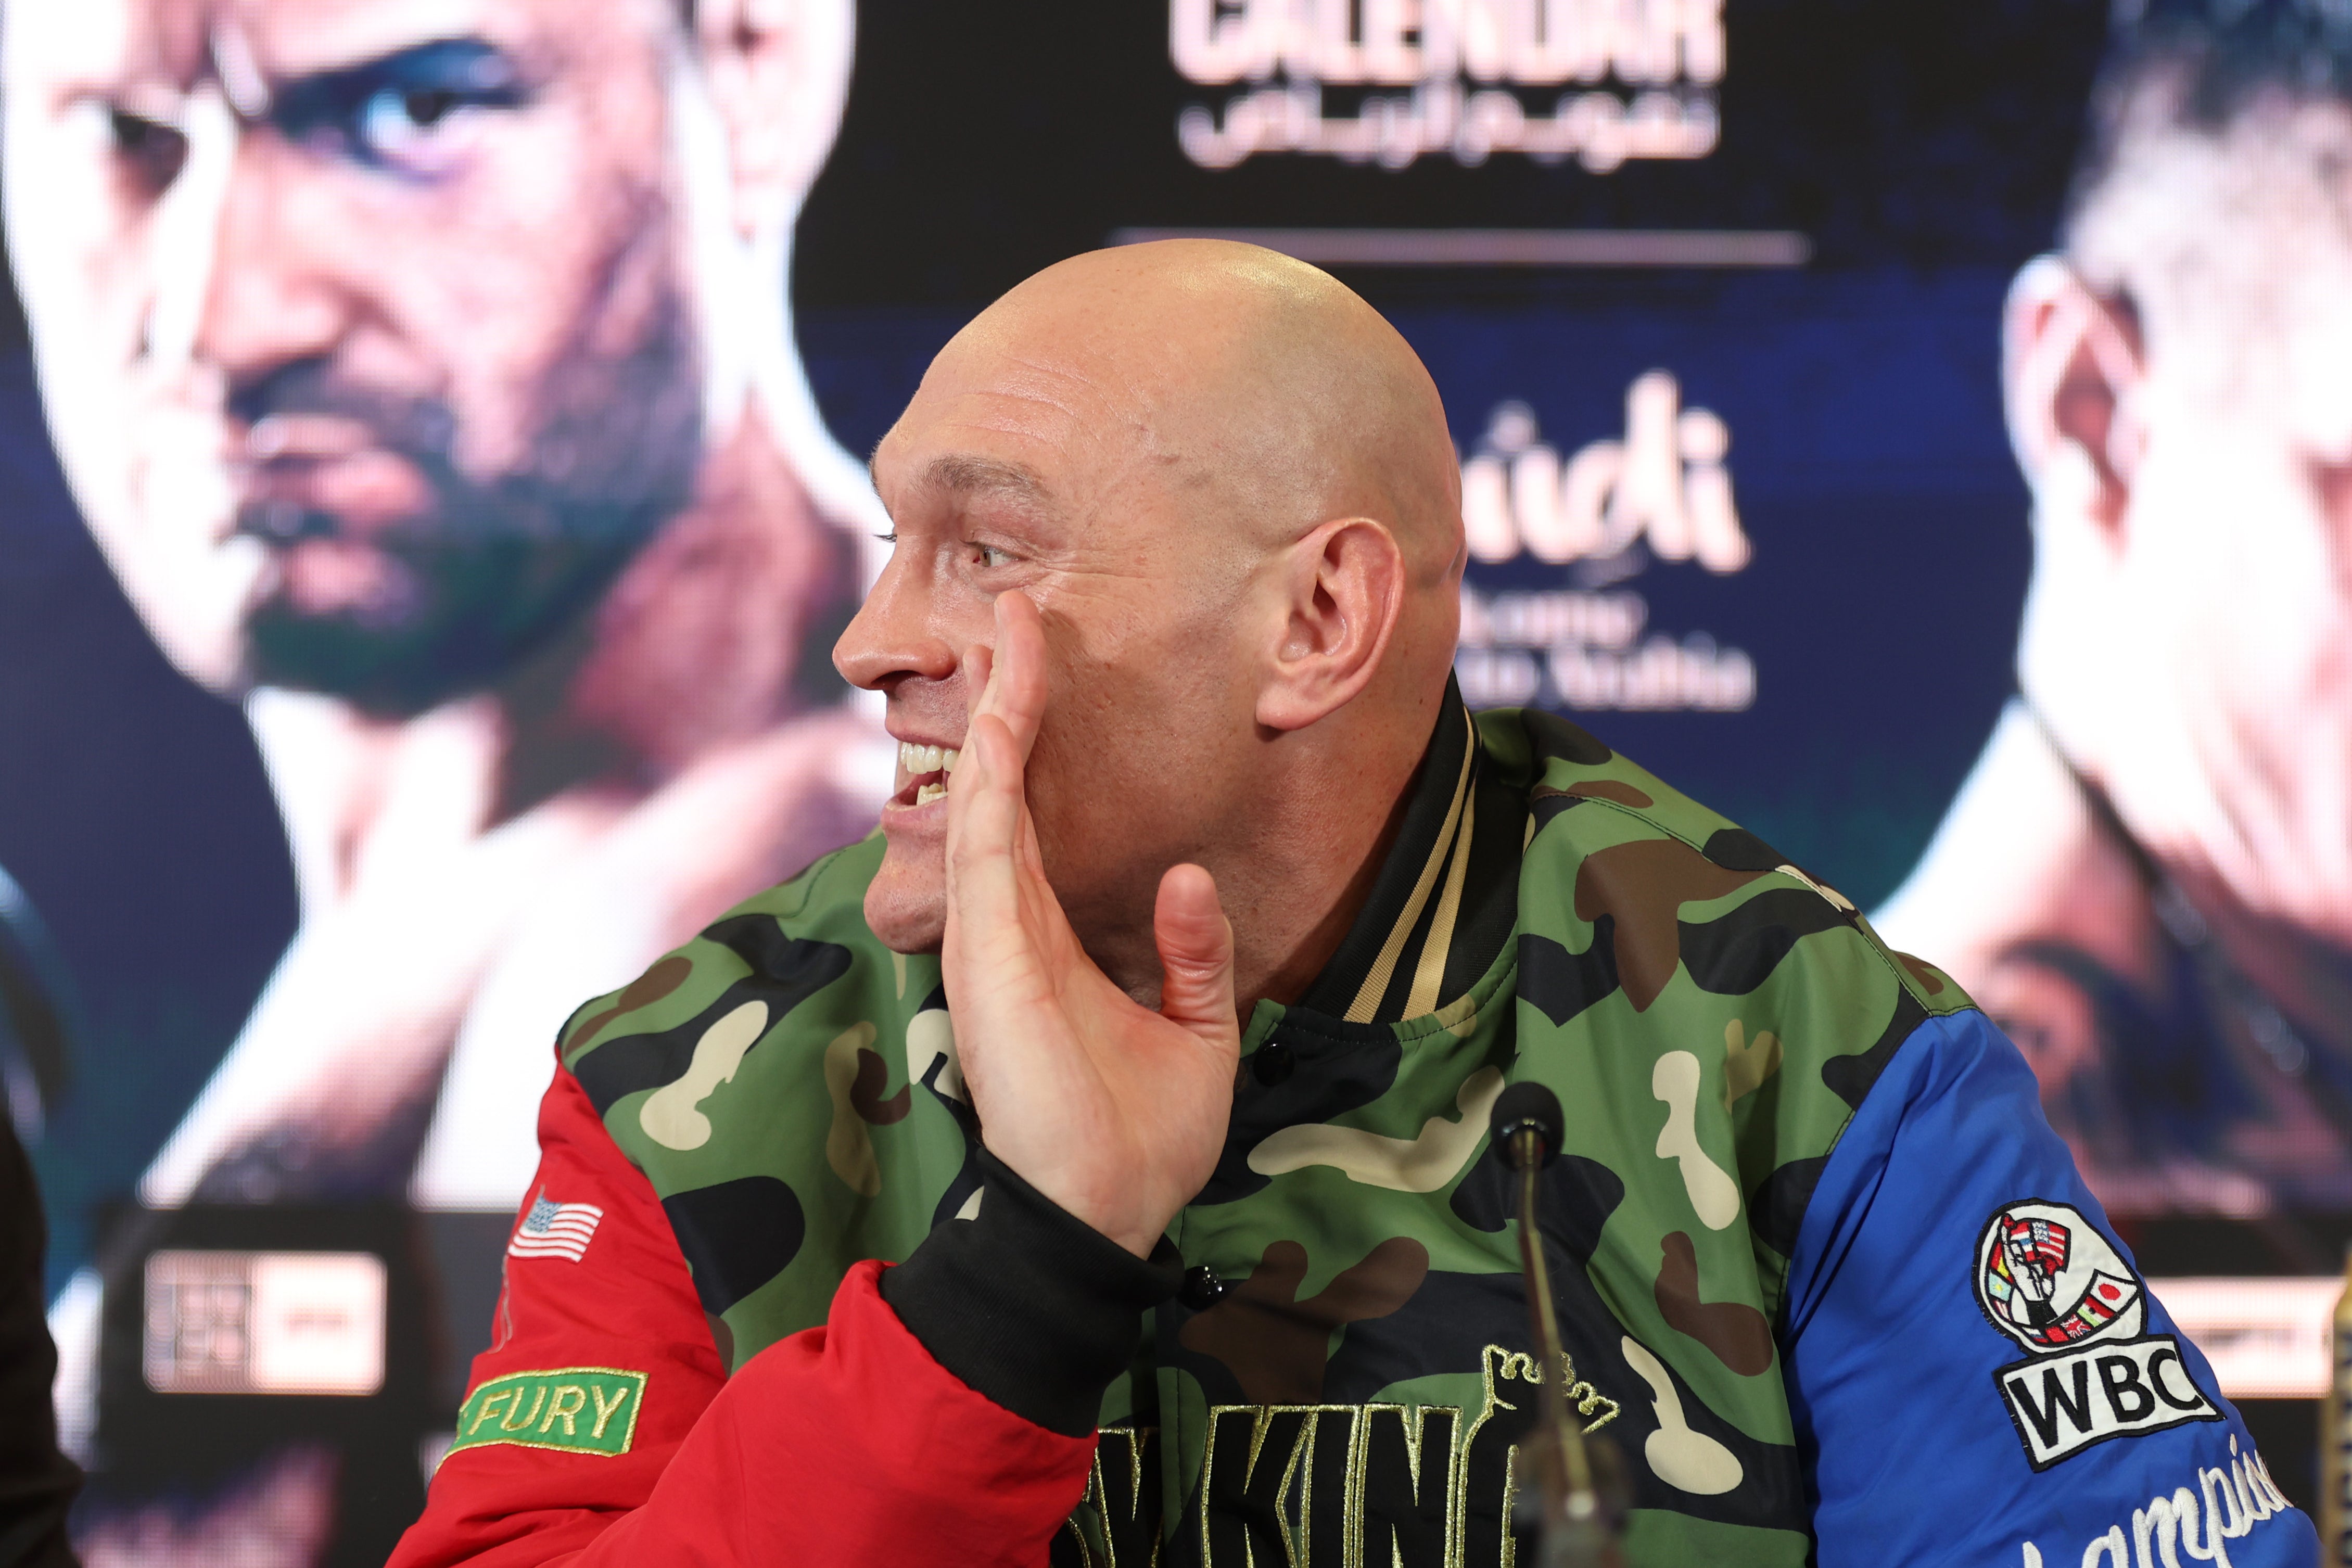 Fury at a pre-fight press conference for his bout with Oleksandr Usyk